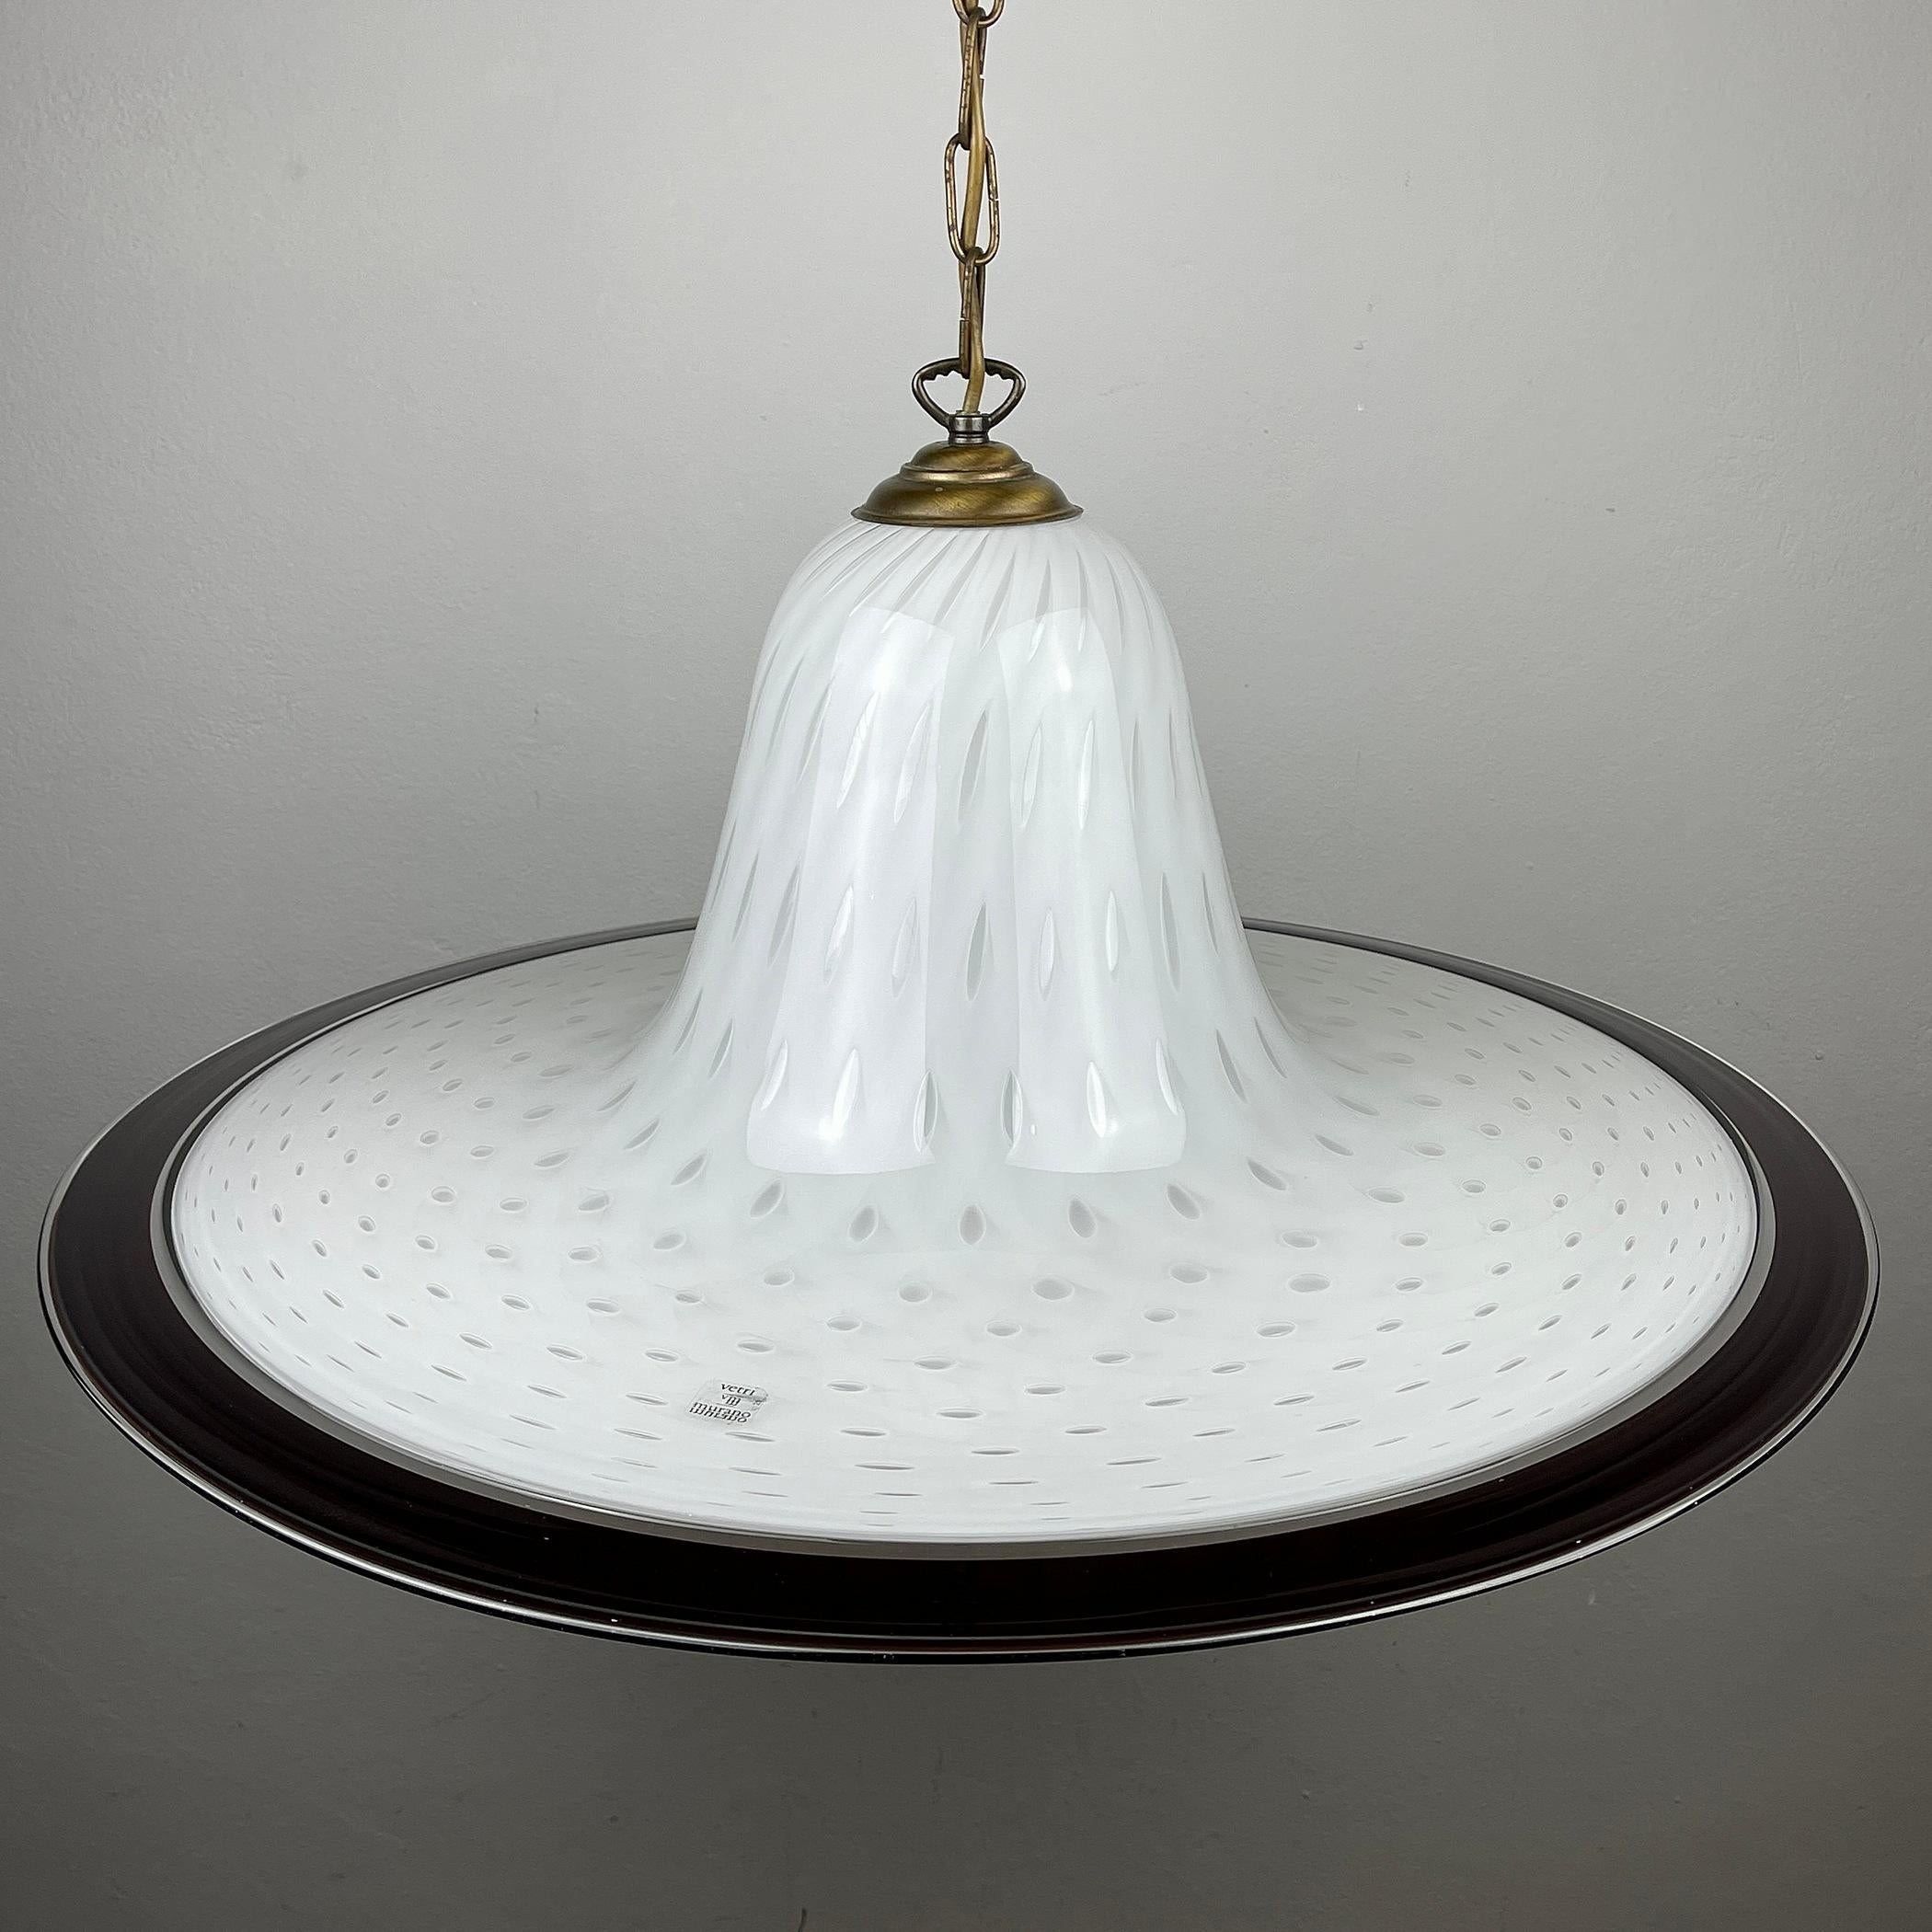 The huge vintage Murano pendant lamp Vetri Murano 025 was made in Italy in the 1970s. Very beautiful white Murano glass with bubbles in the form of a tulip. Perfect vintage condition. No chips or cracks.
Requires a standard Edison E27 with a screw